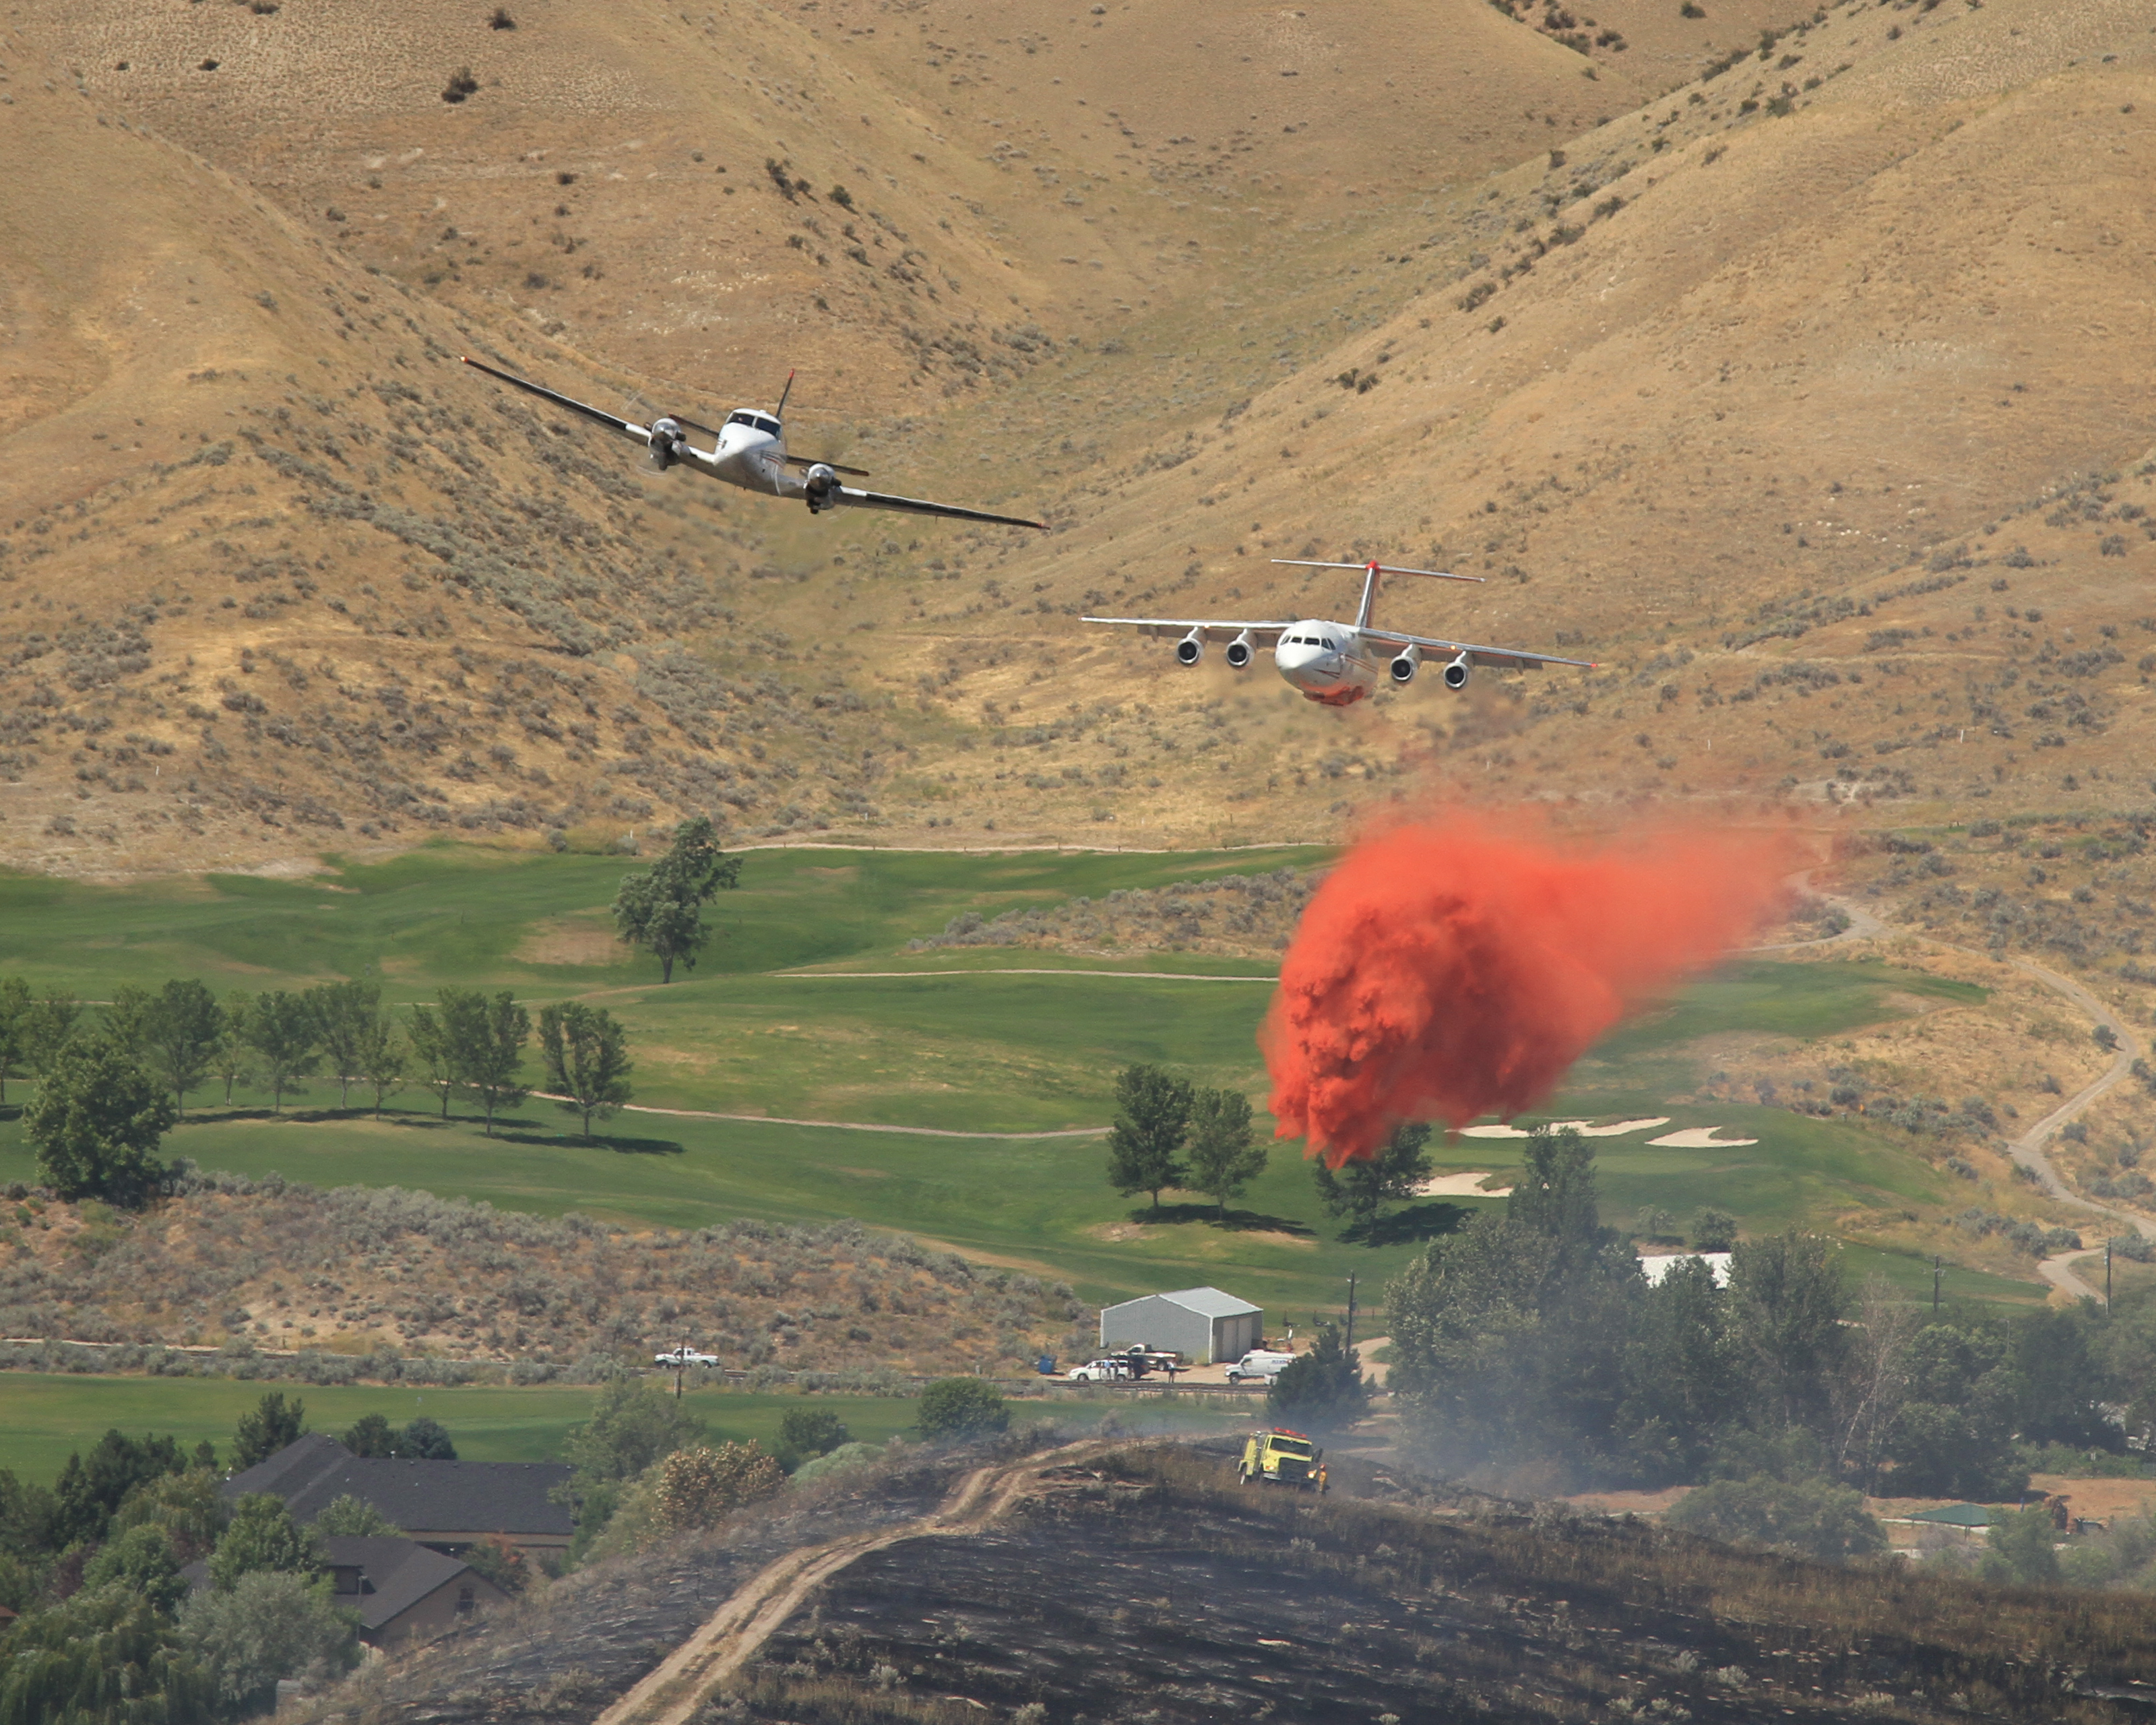 Lead plane with a large airtanker dropping fire retardant